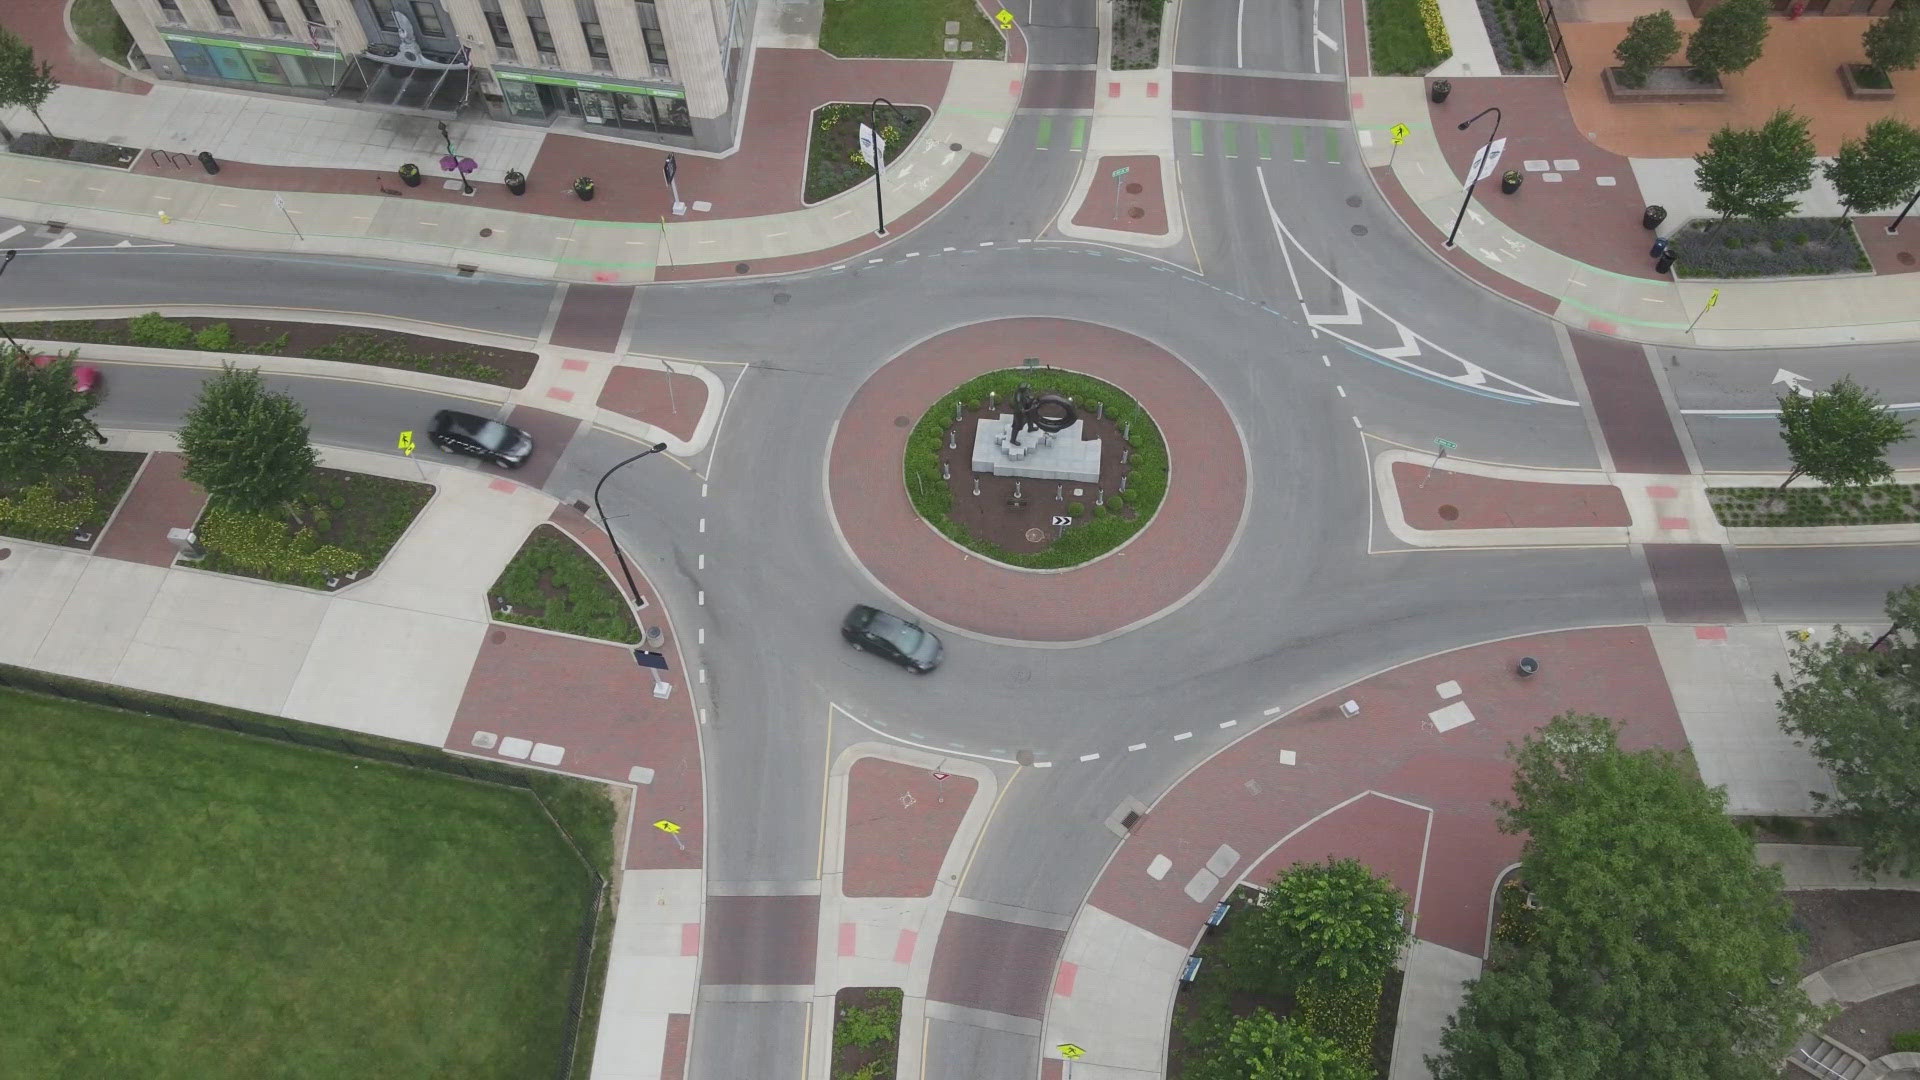 Are you a fan of roundabouts? We have an update on what makes them safer for drivers across Northeast Ohio.